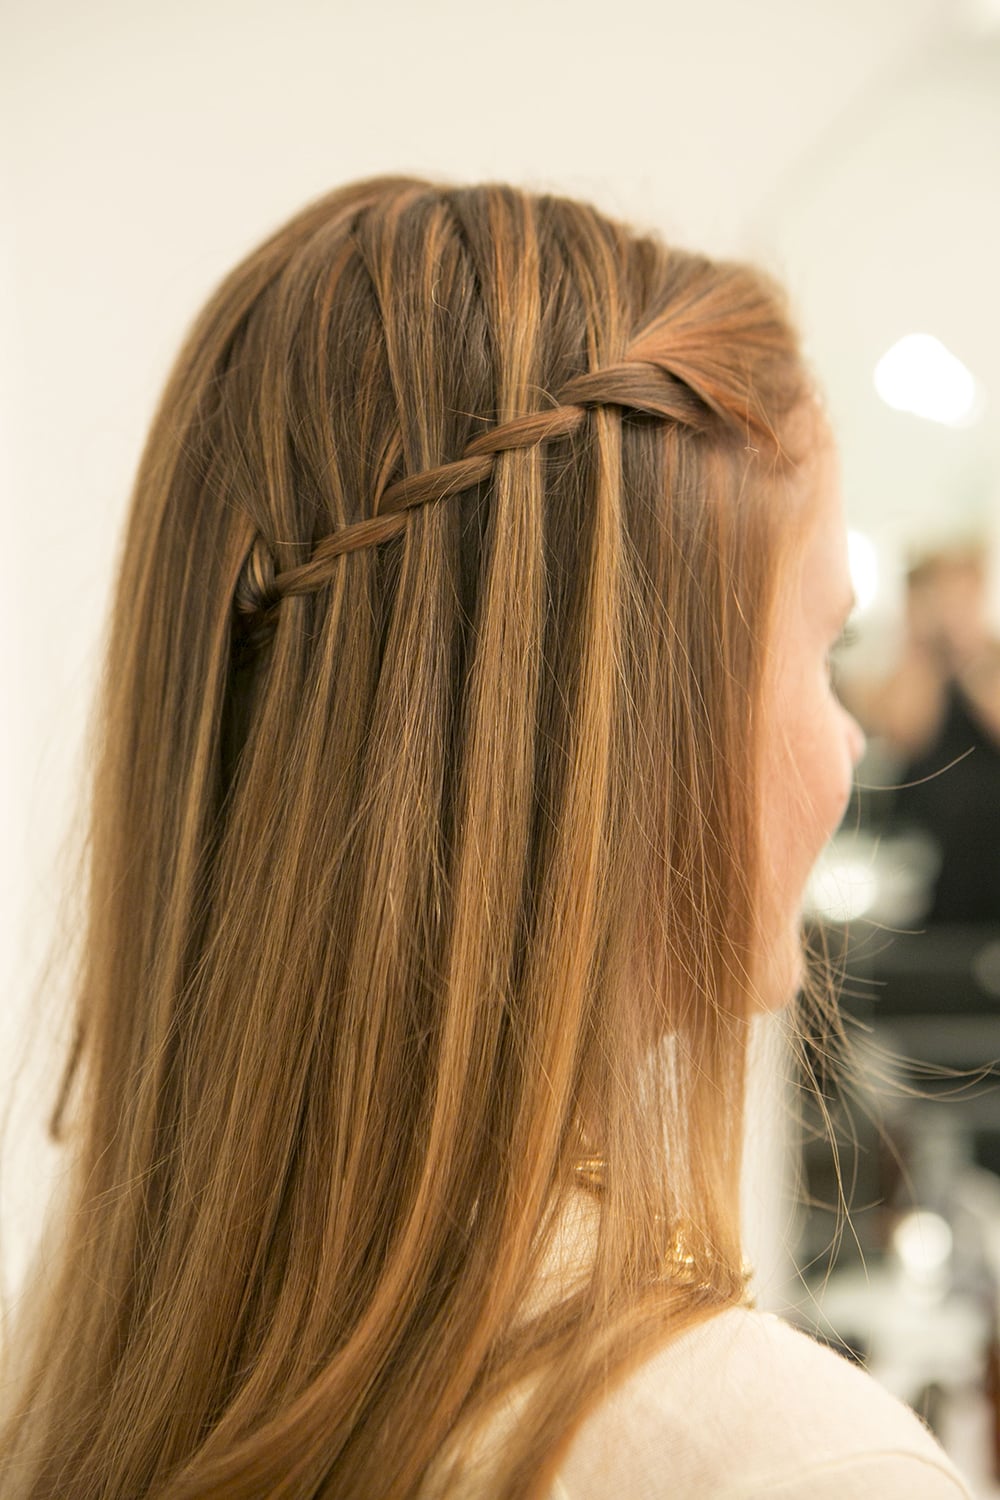 Image of Waterfall braid hairstyle for boys